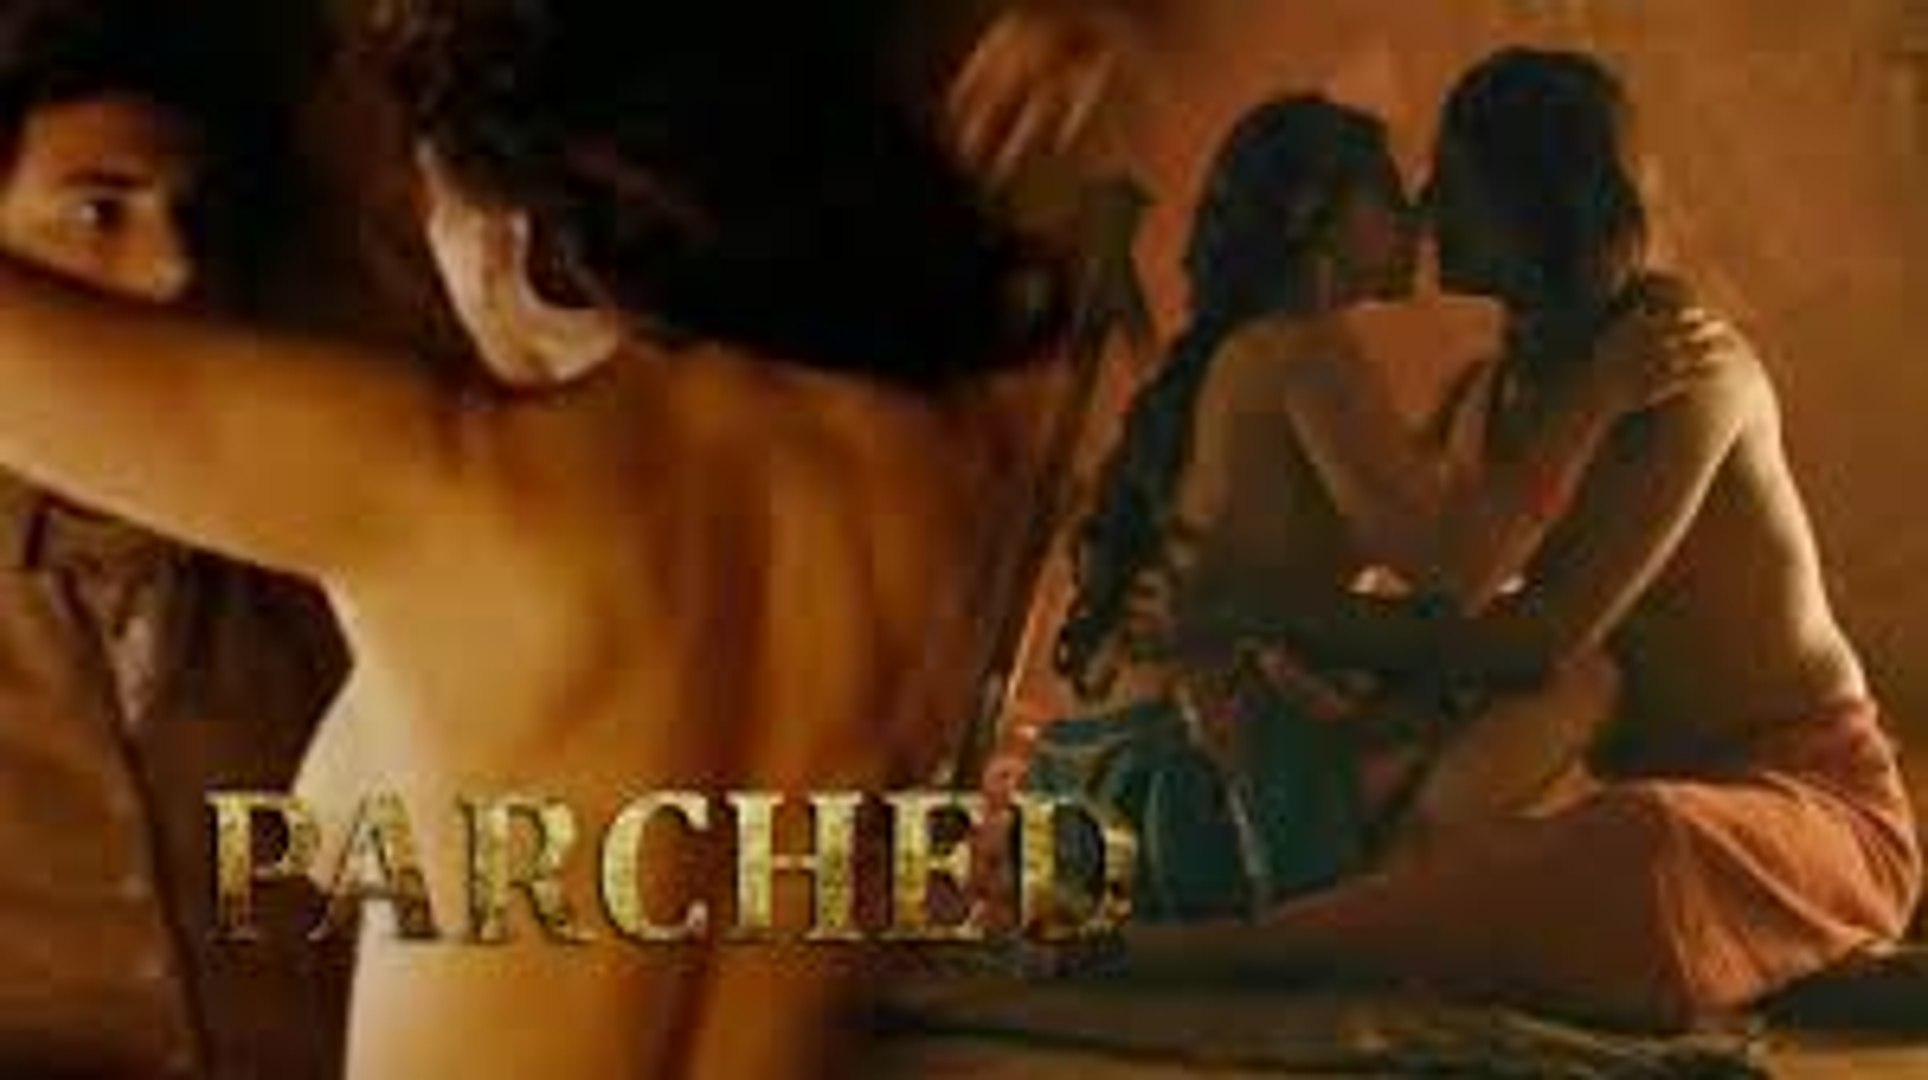 Porn Movies Dailymotion - Parched - UNRATED - Dvd Part-1 - video dailymotion